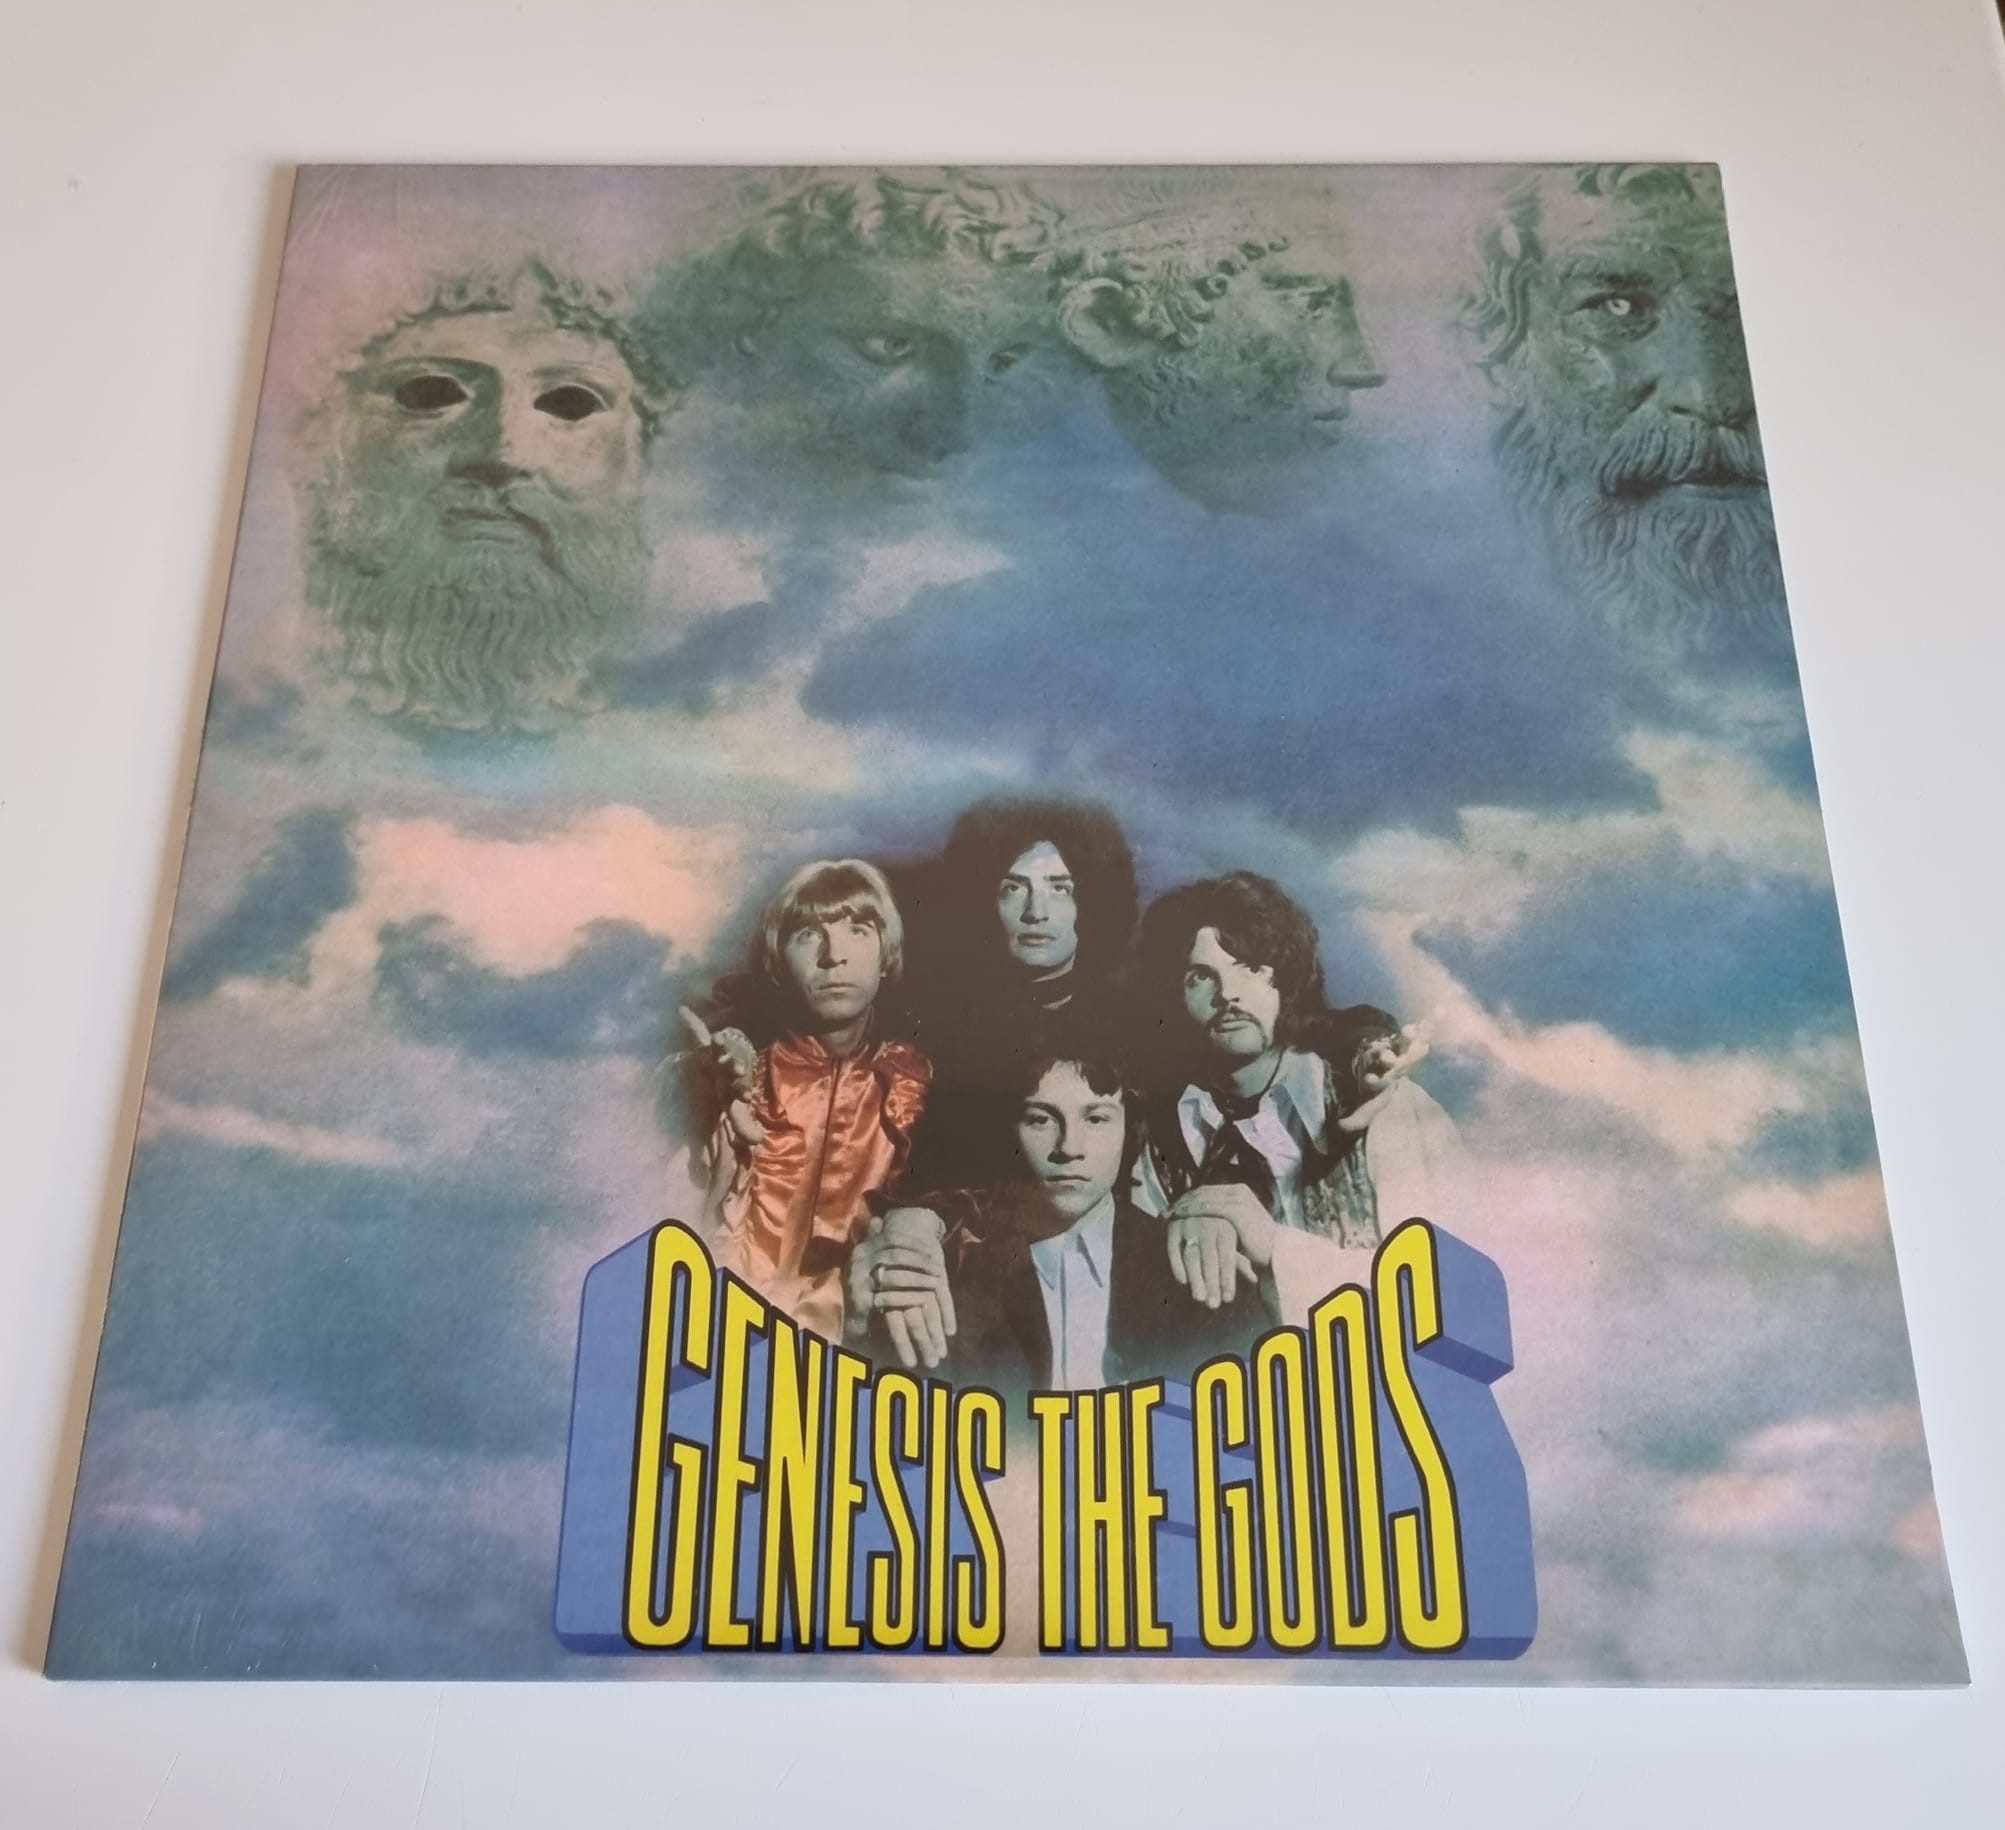 Buy this rare The Gods record by clicking here